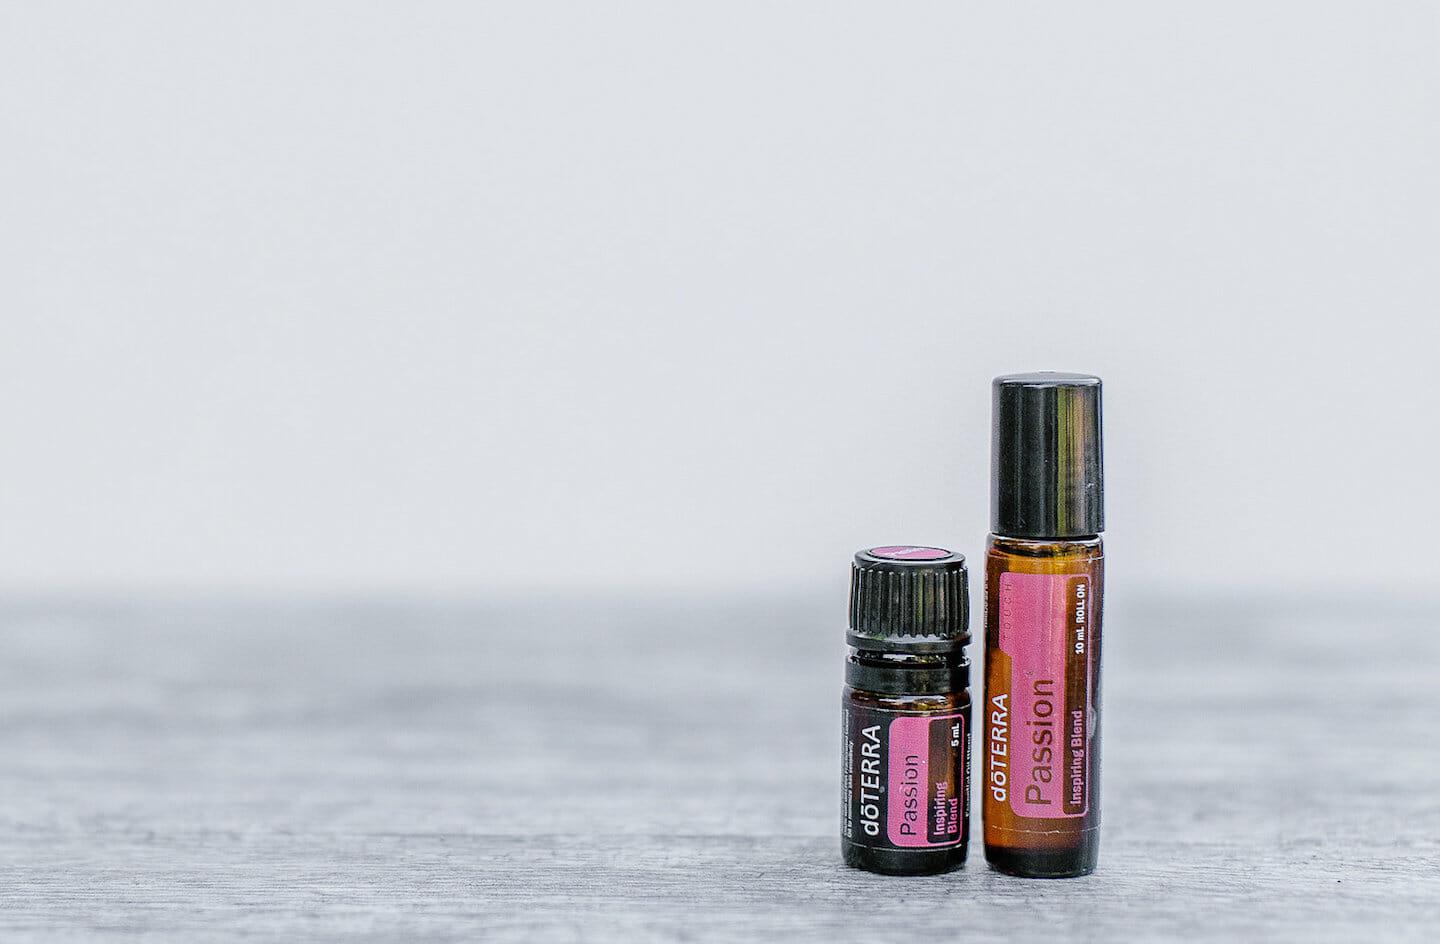 Passion Essential Oil 15ml bottle and rollerbottle side by side on table